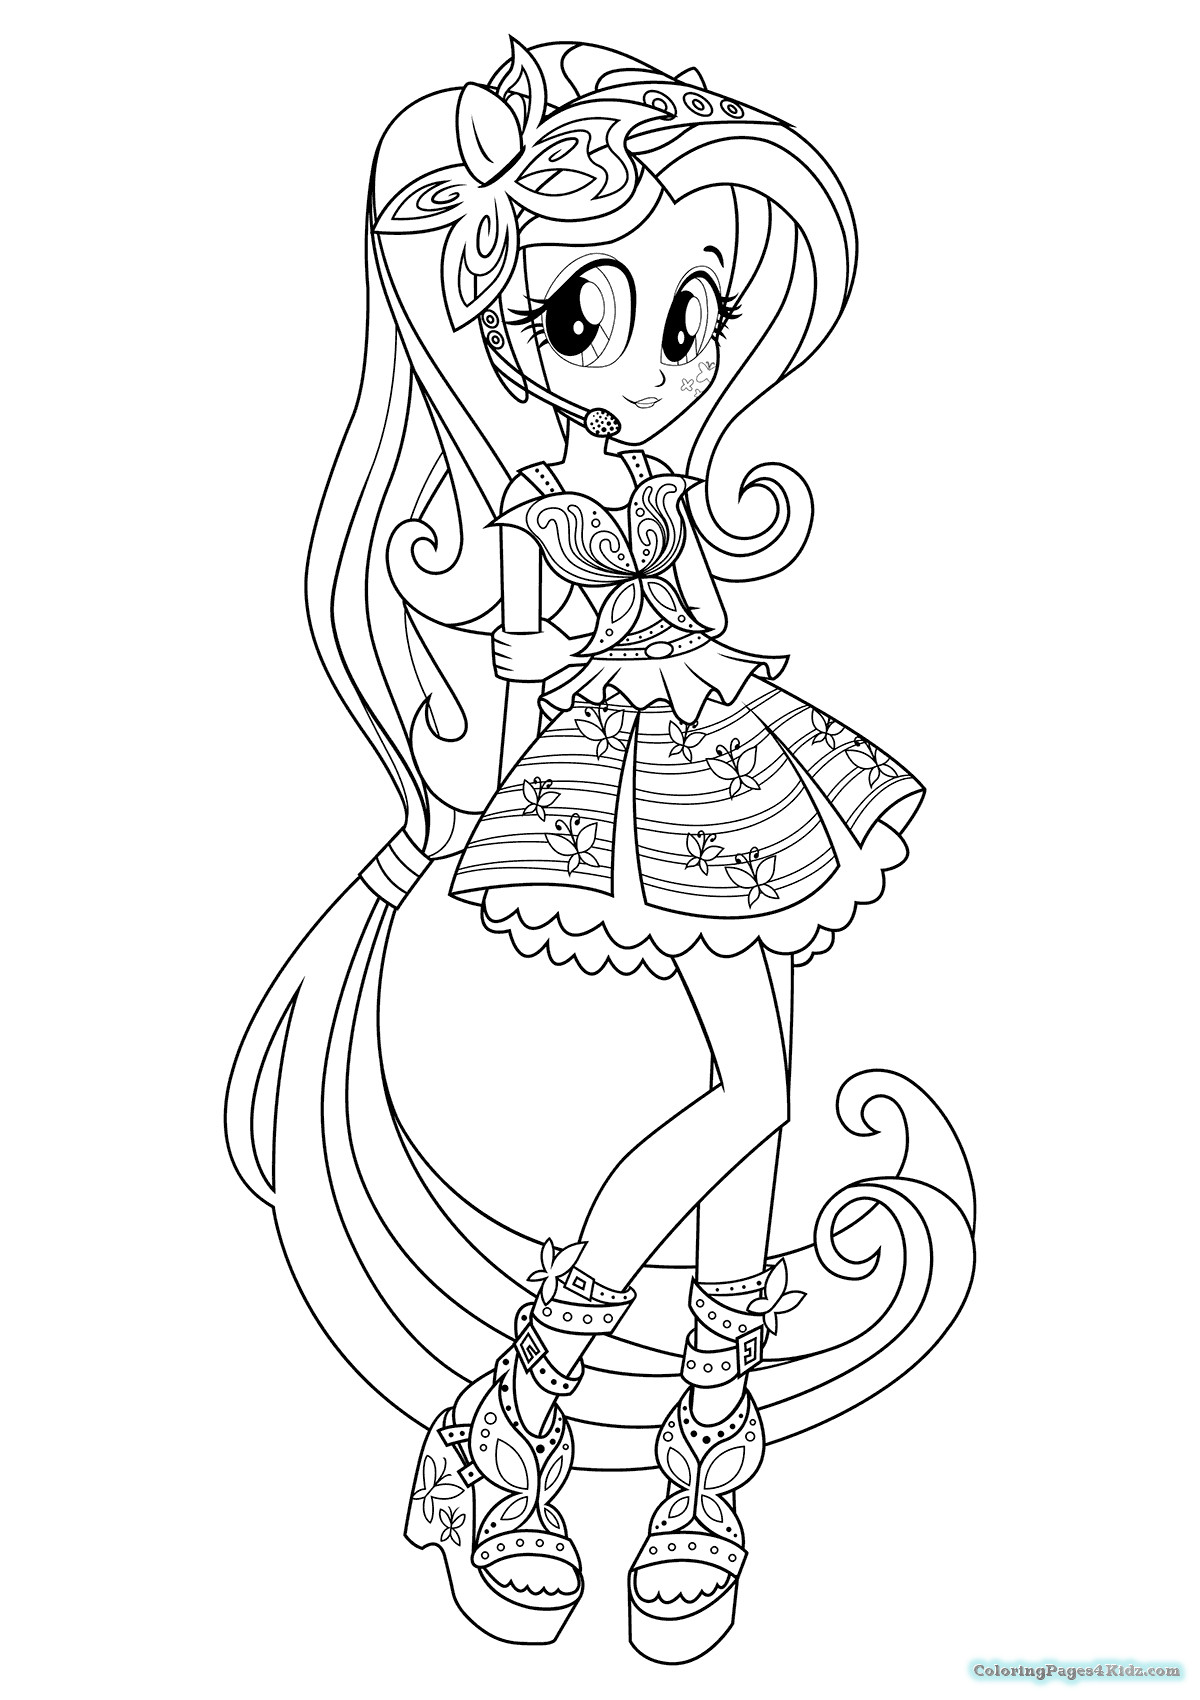 Equestria Girls Rarity Coloring Pages
 Mlp Eg Coloring Pages at GetColorings